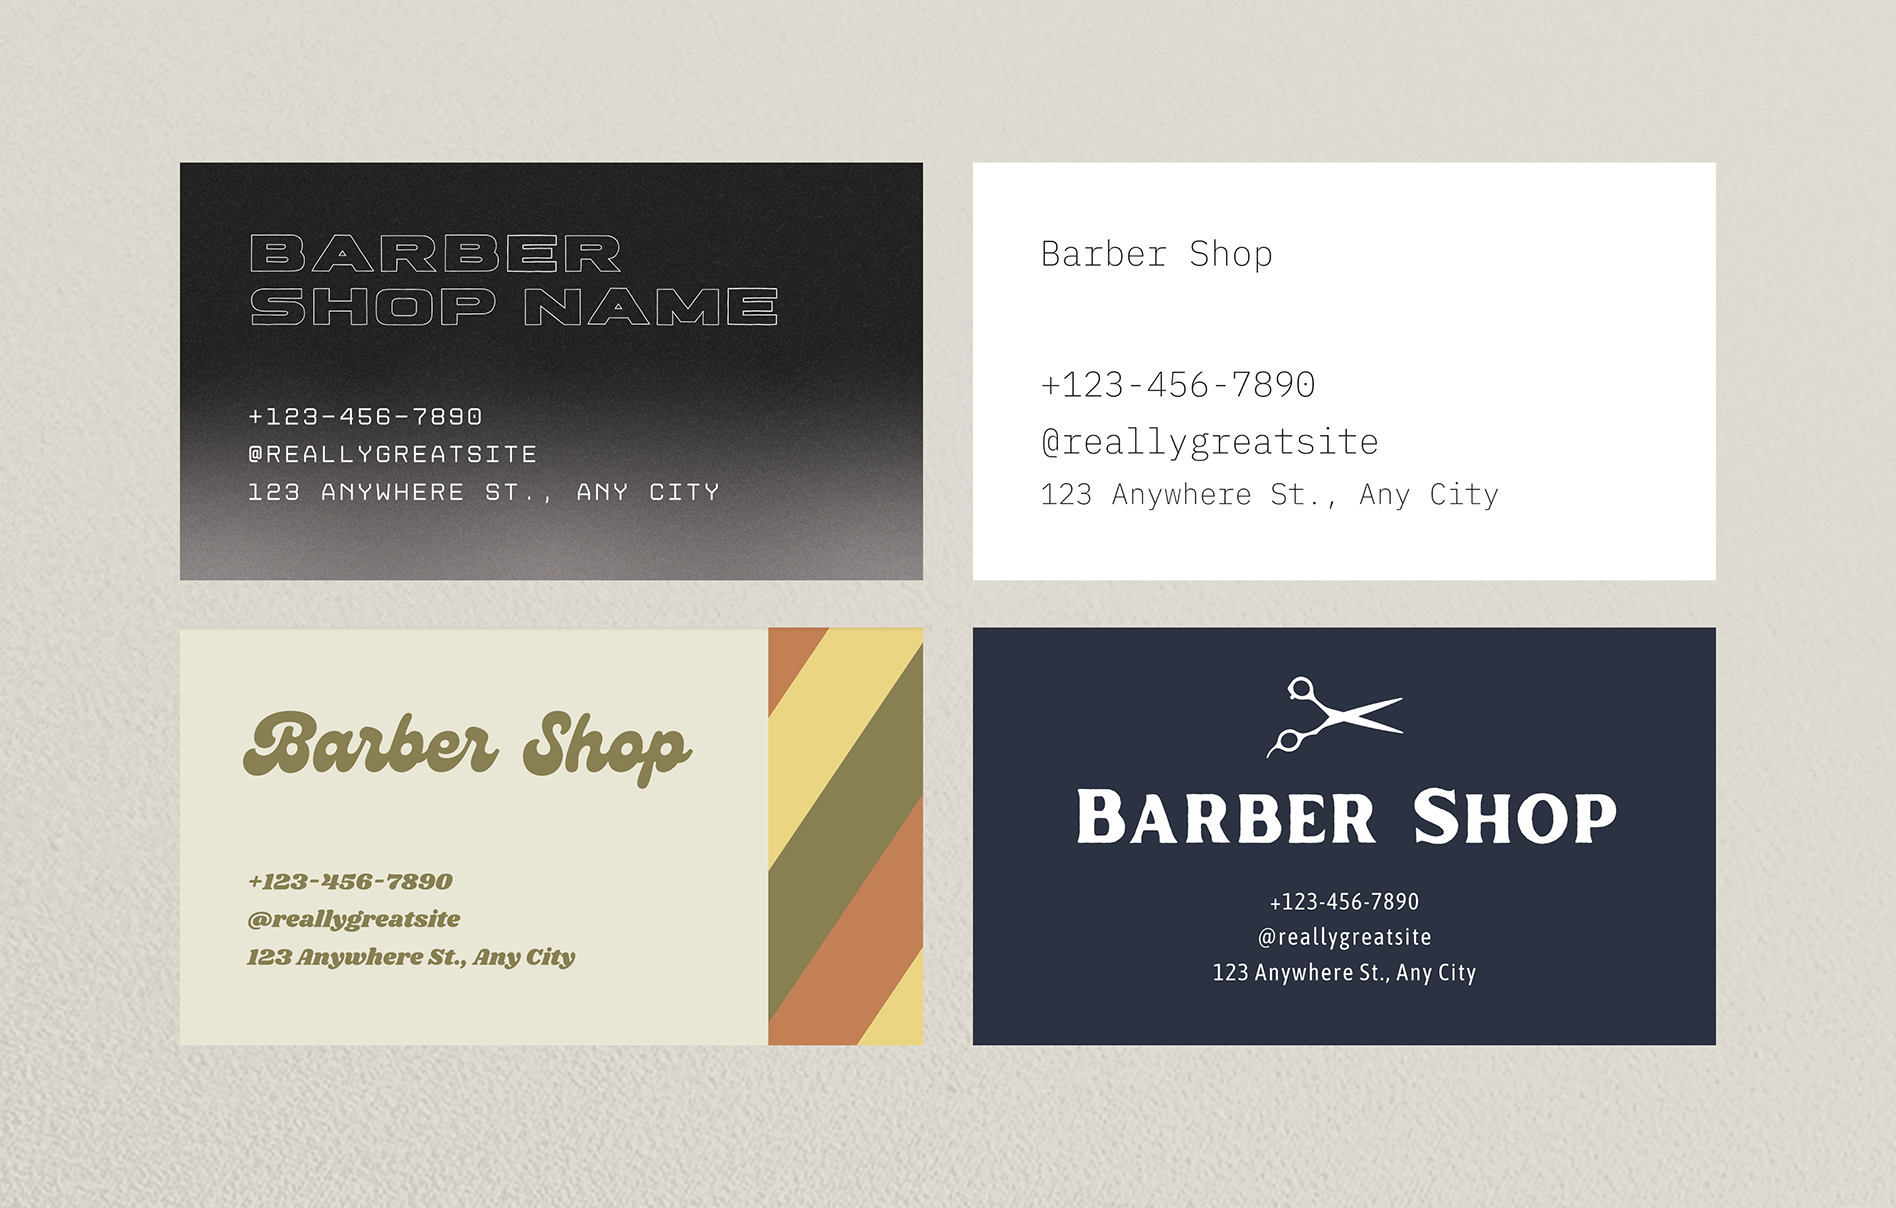 Four barber business cards